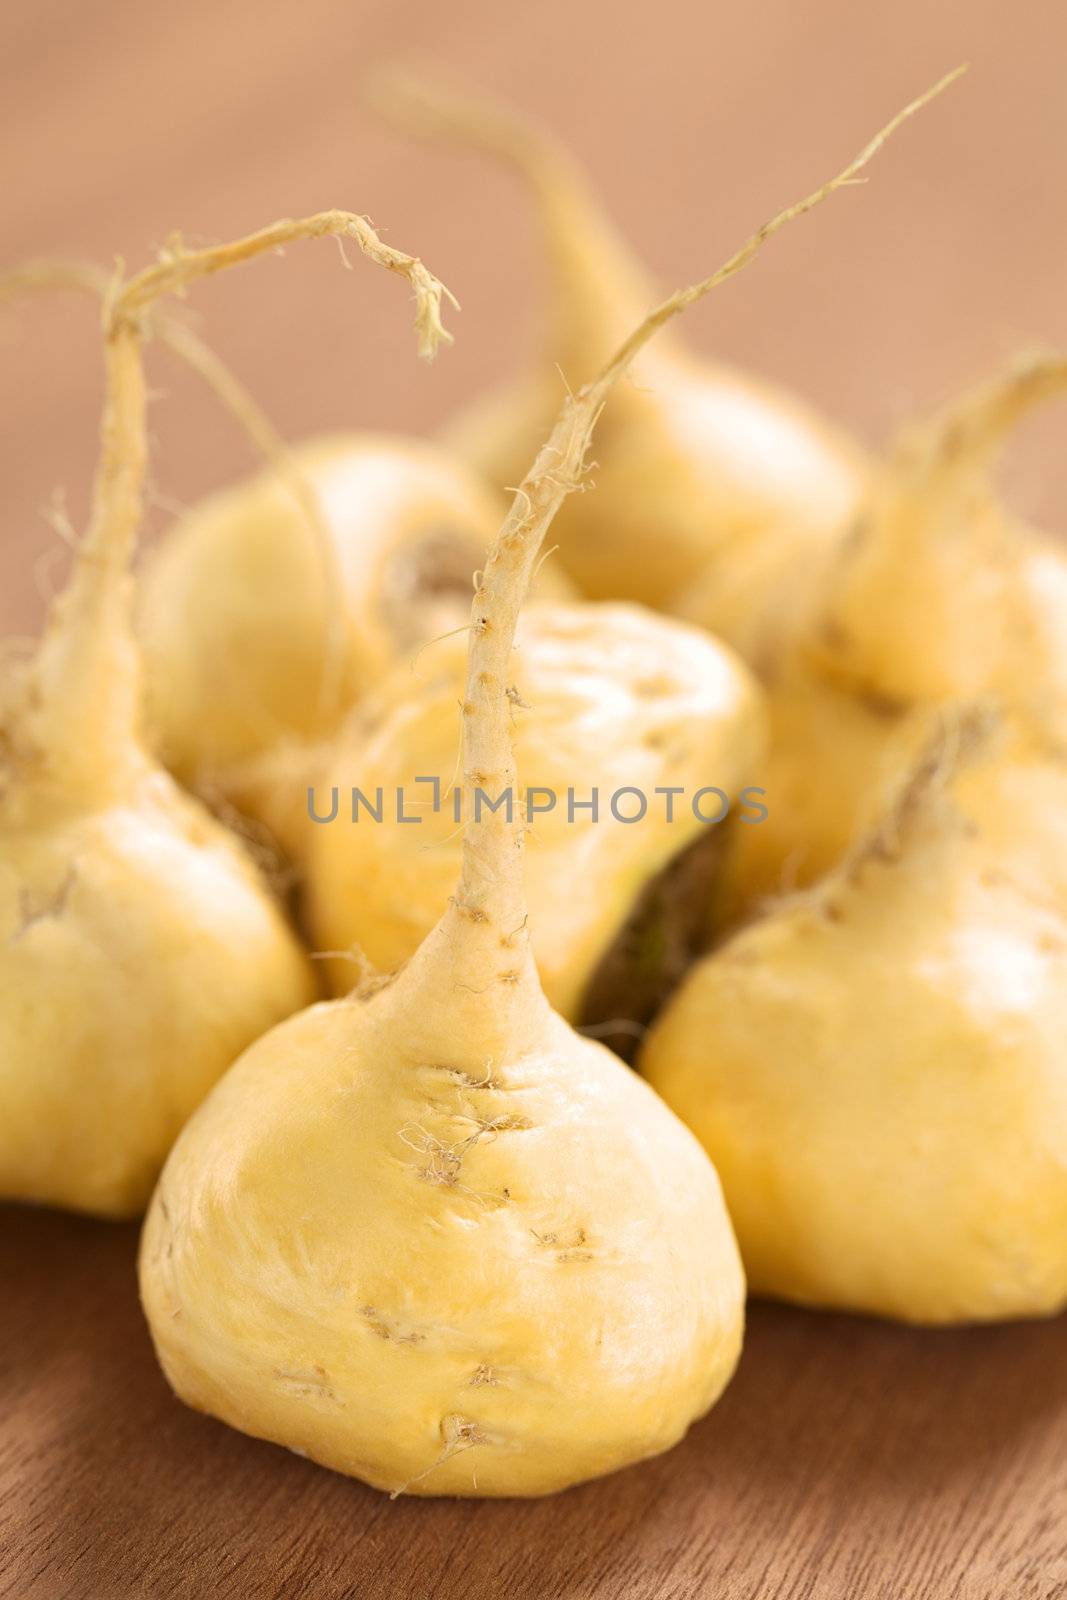 Fresh maca roots or Peruvian ginseng (lat. Lepidium meyenii) which are popular in Peru for their various health effects (Selective Focus, Focus on the maca root in the front)